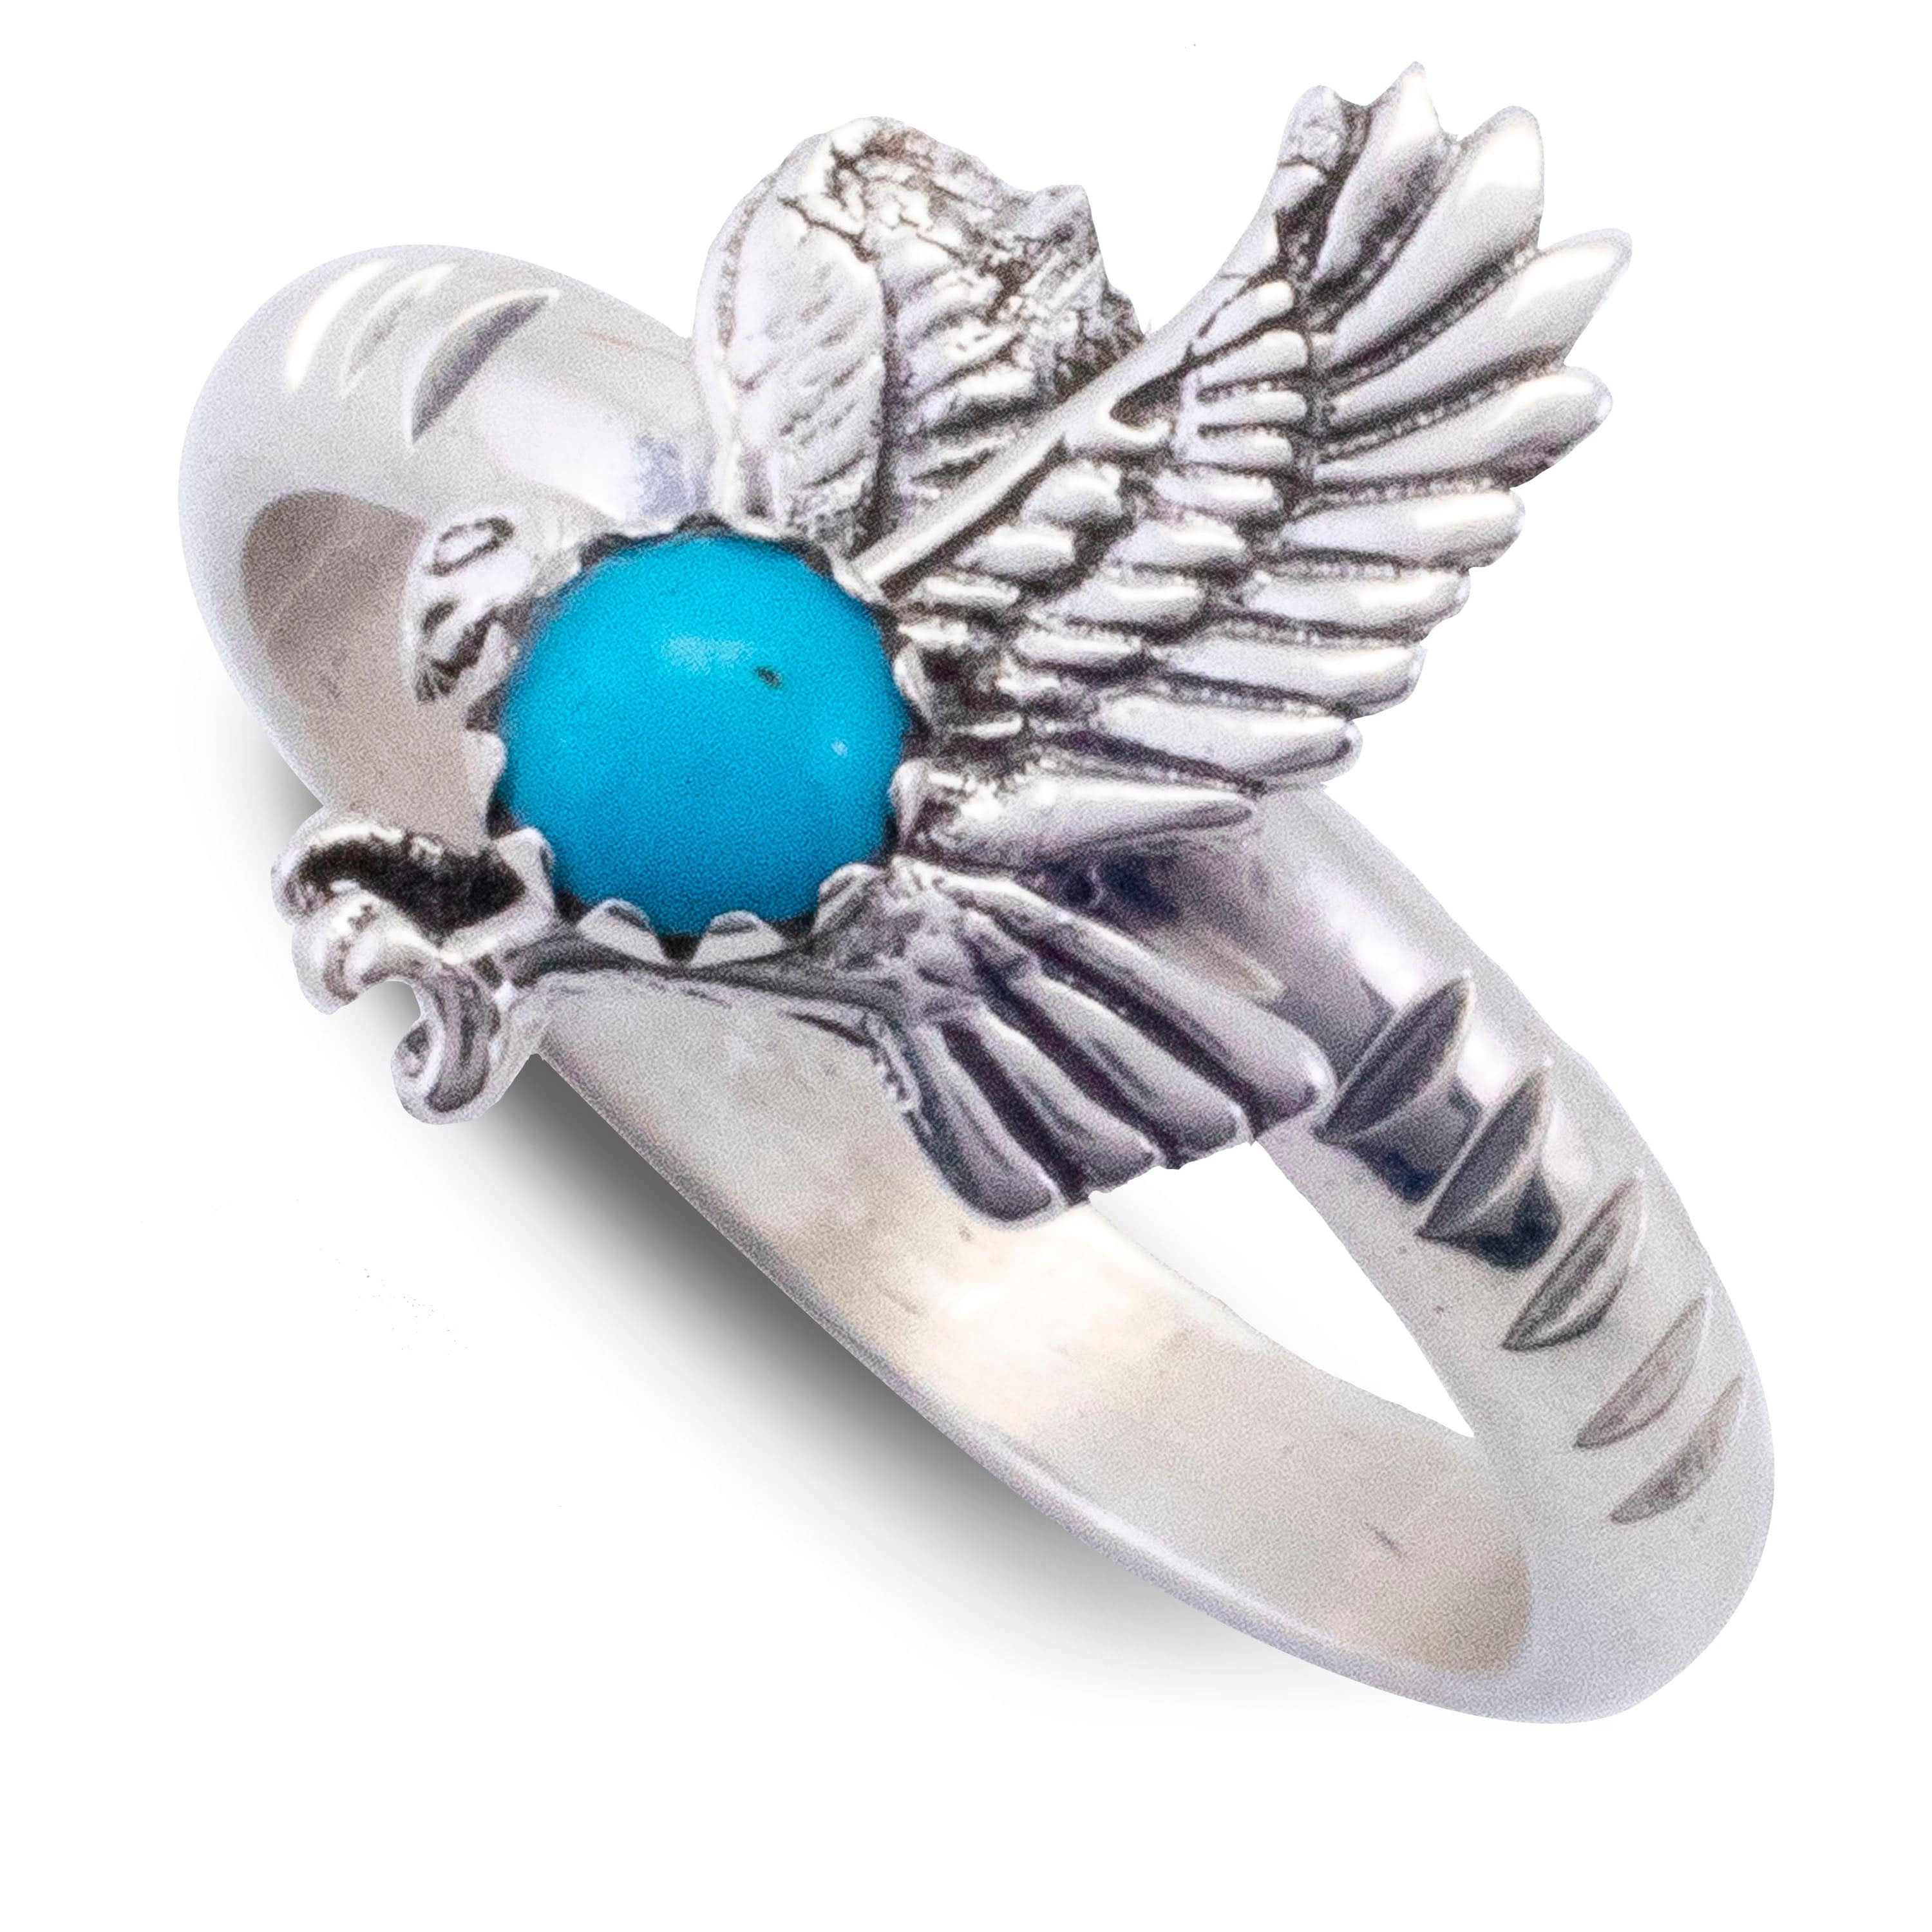 Kalifano Native American Jewelry Eagle with Genuine Turquoise USA Native American Made 925 Sterling Silver Ring